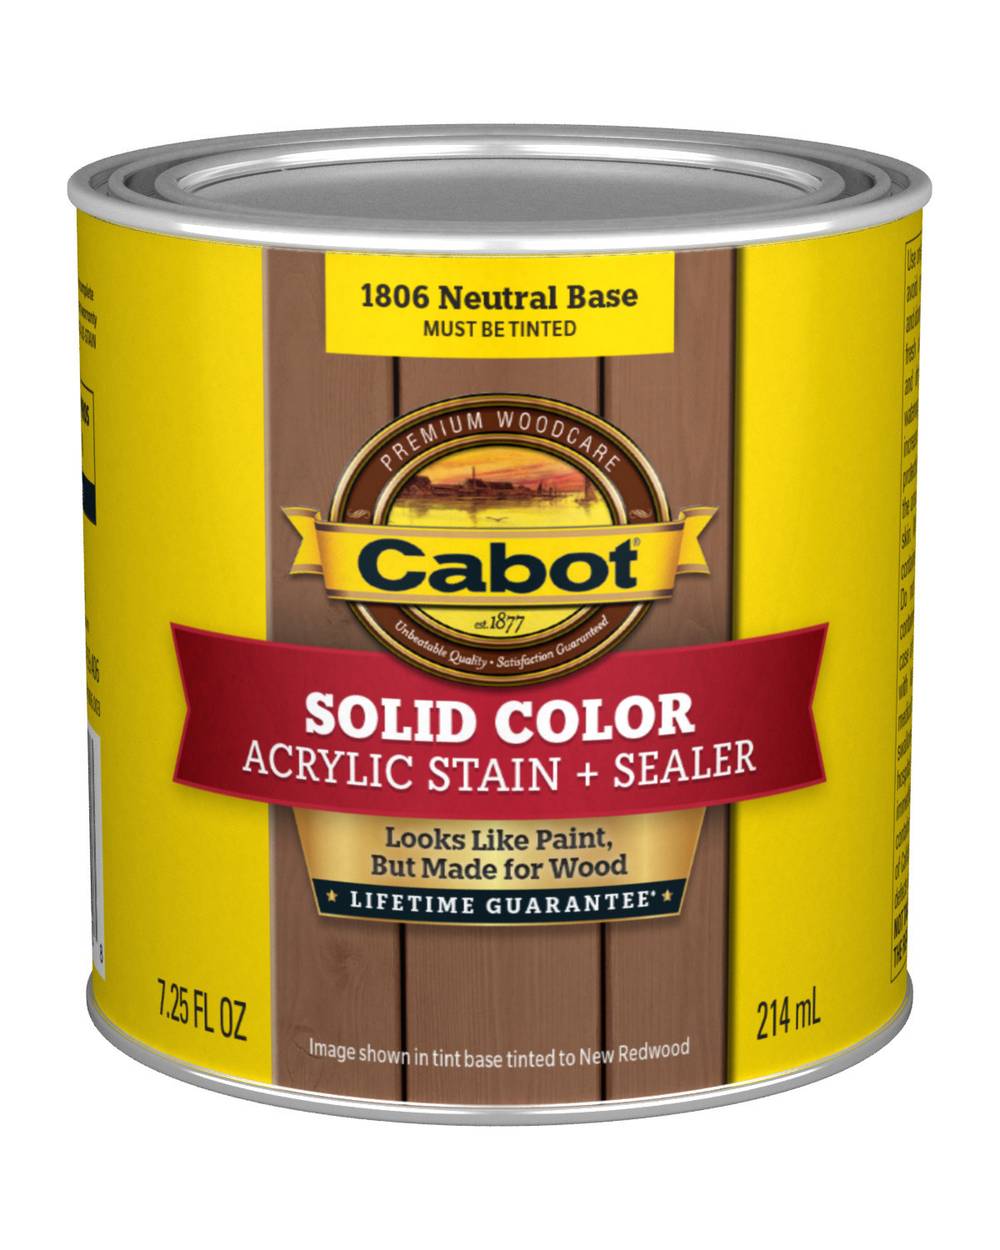 Cabot Solid Color Acrylic Stain & Sealer Neutral Base